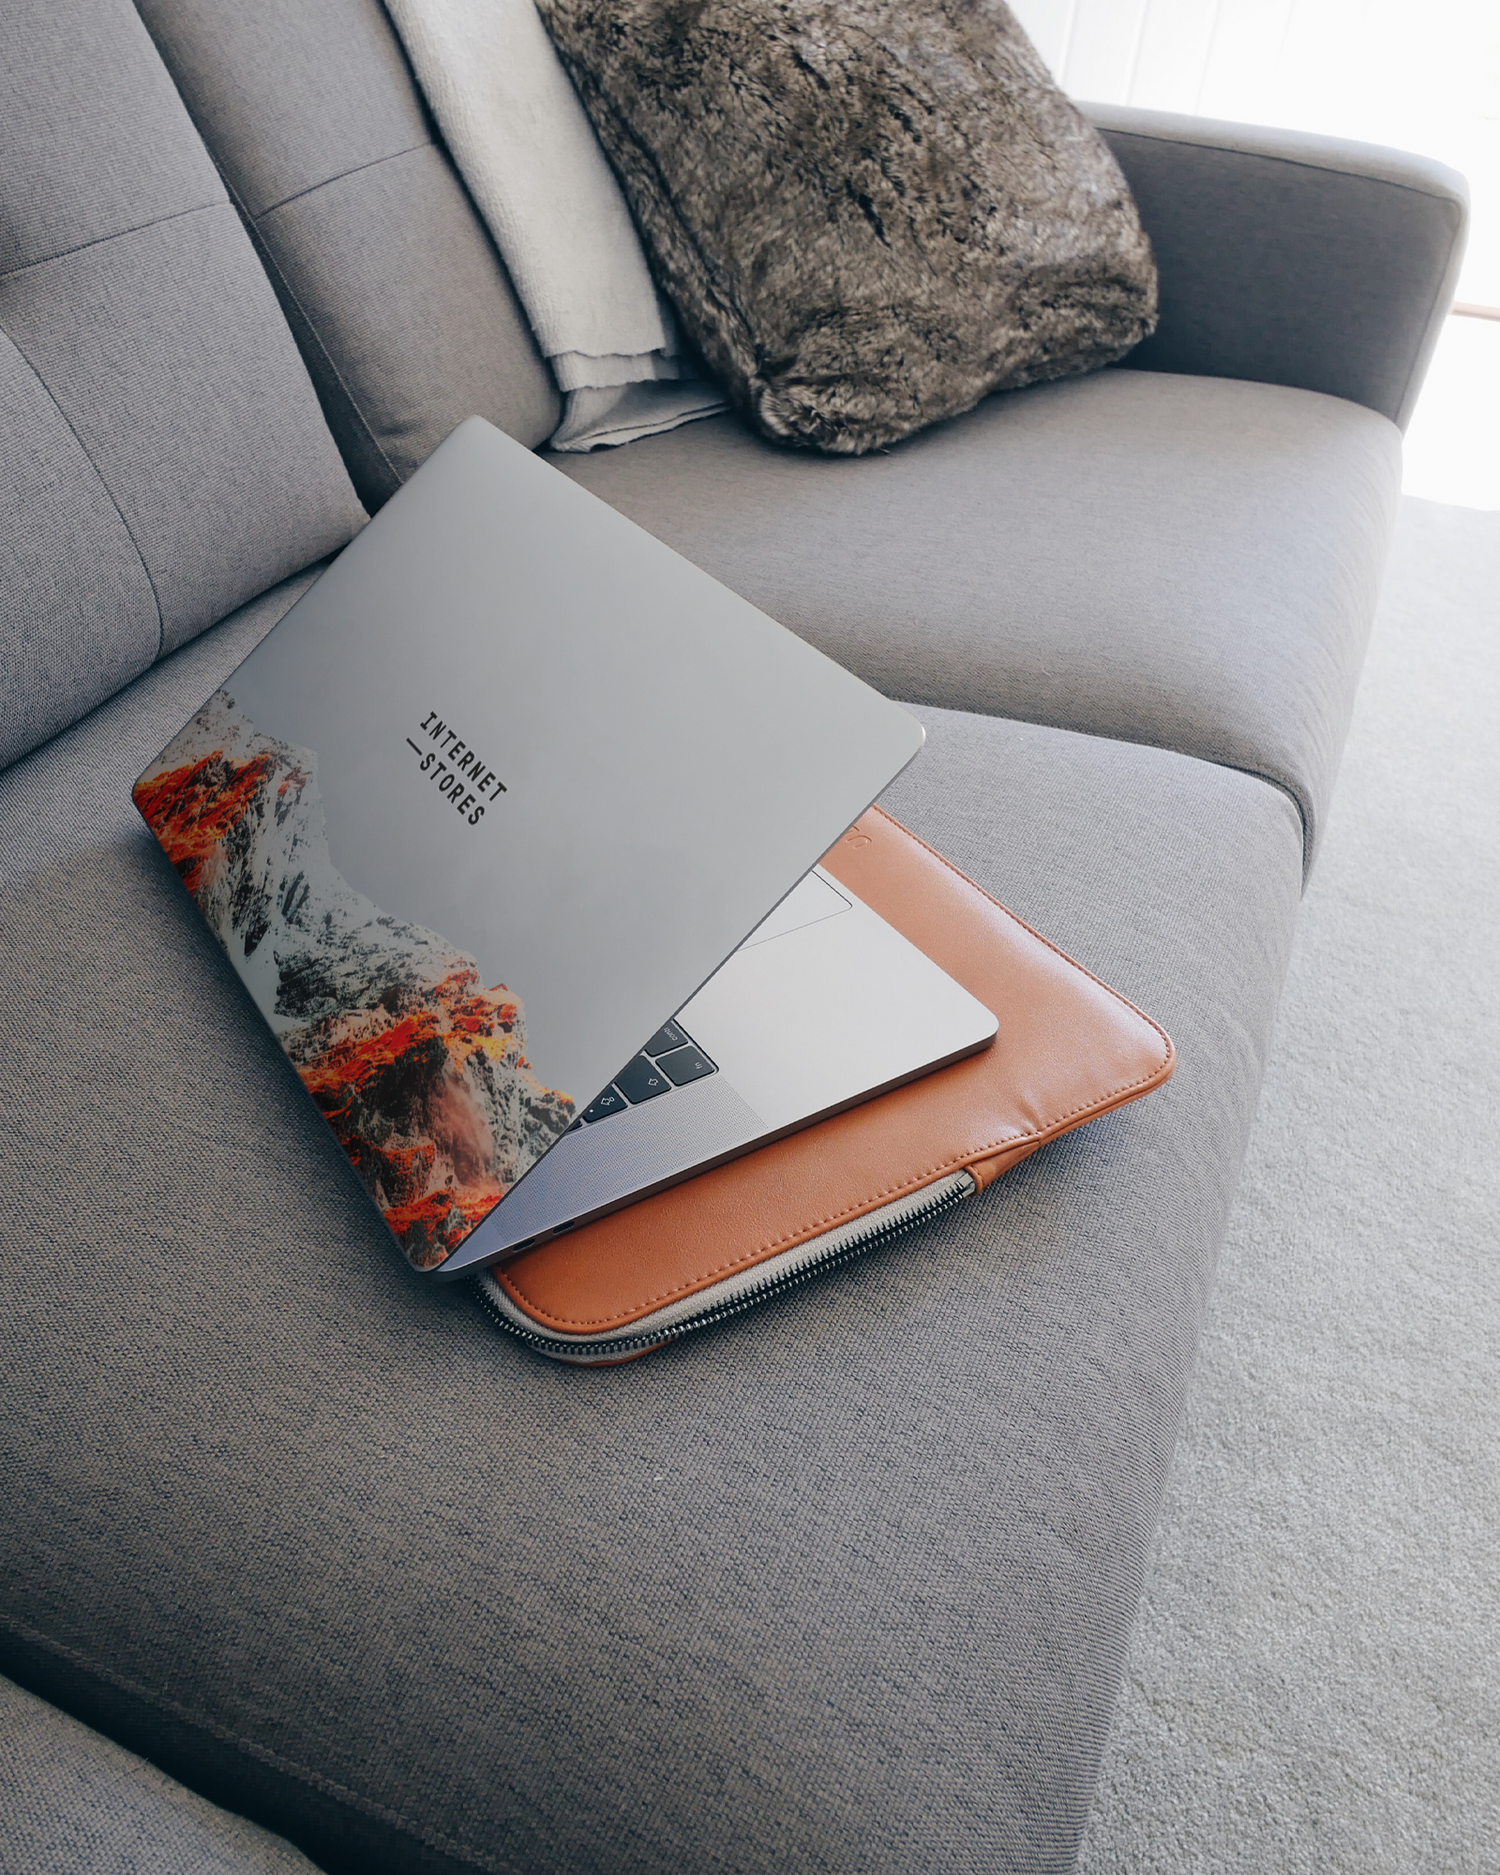 High Peak Laptop Skin for 15 inch Apple MacBooks on a couch